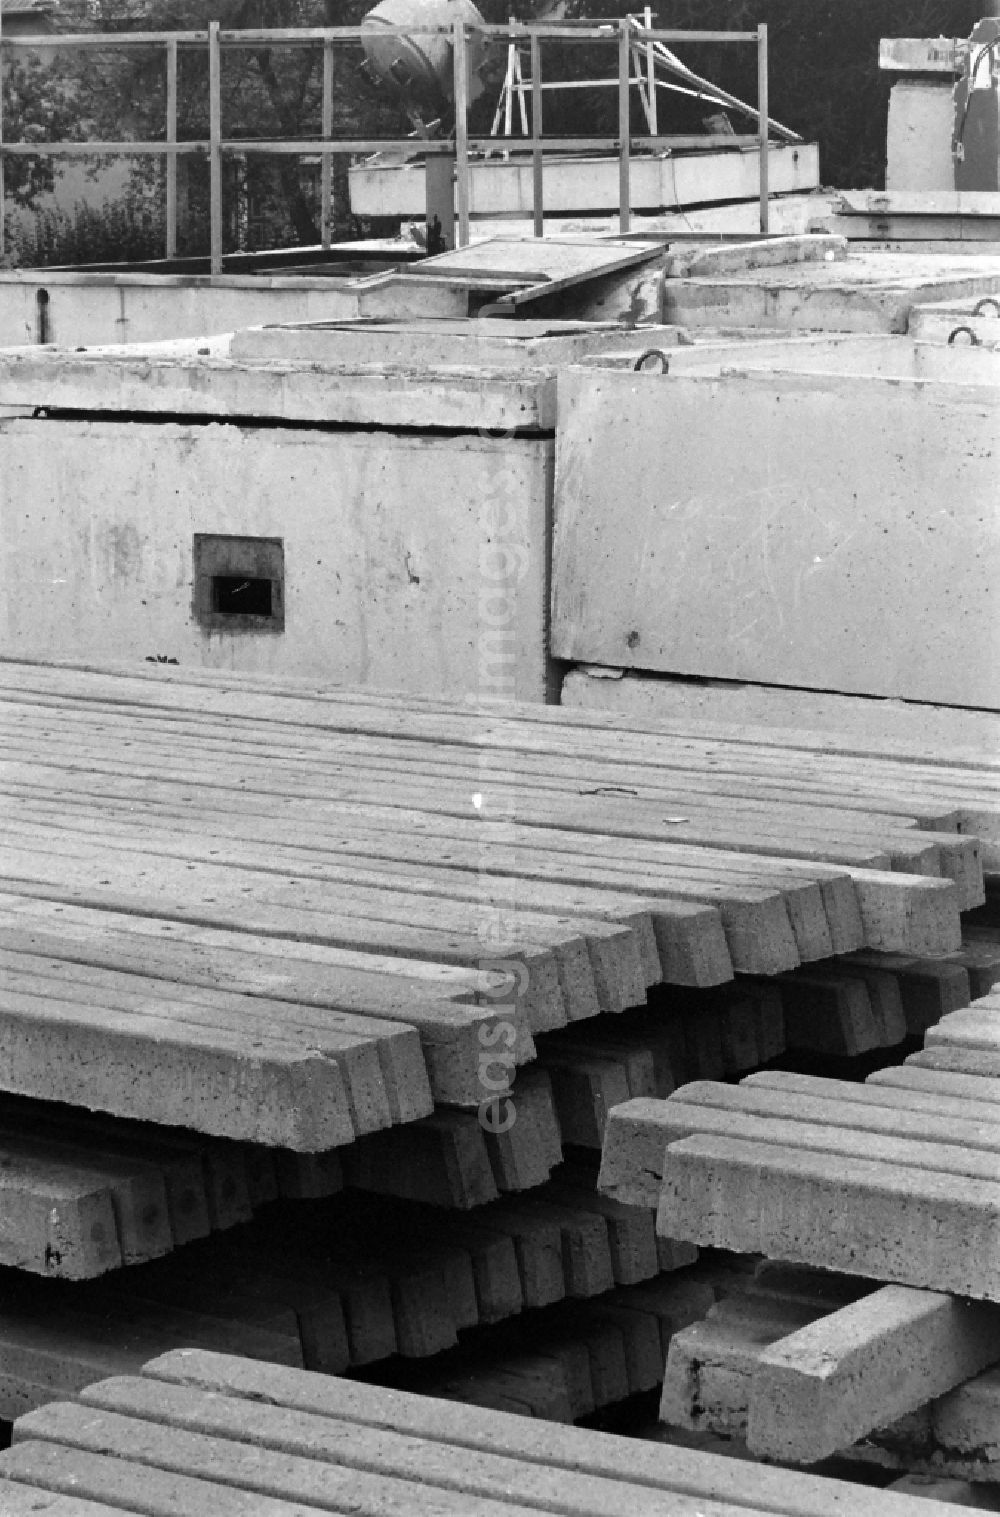 GDR image archive: Berlin - Fragments of the decaying and dismantled watchtower concrete elements of the border fortifications and wall as well as security structures in the former blocking strip of the state border at a camp of the border troops in the district of Steinstuecken in Berlin on the territory of the former GDR, German Democratic Republic